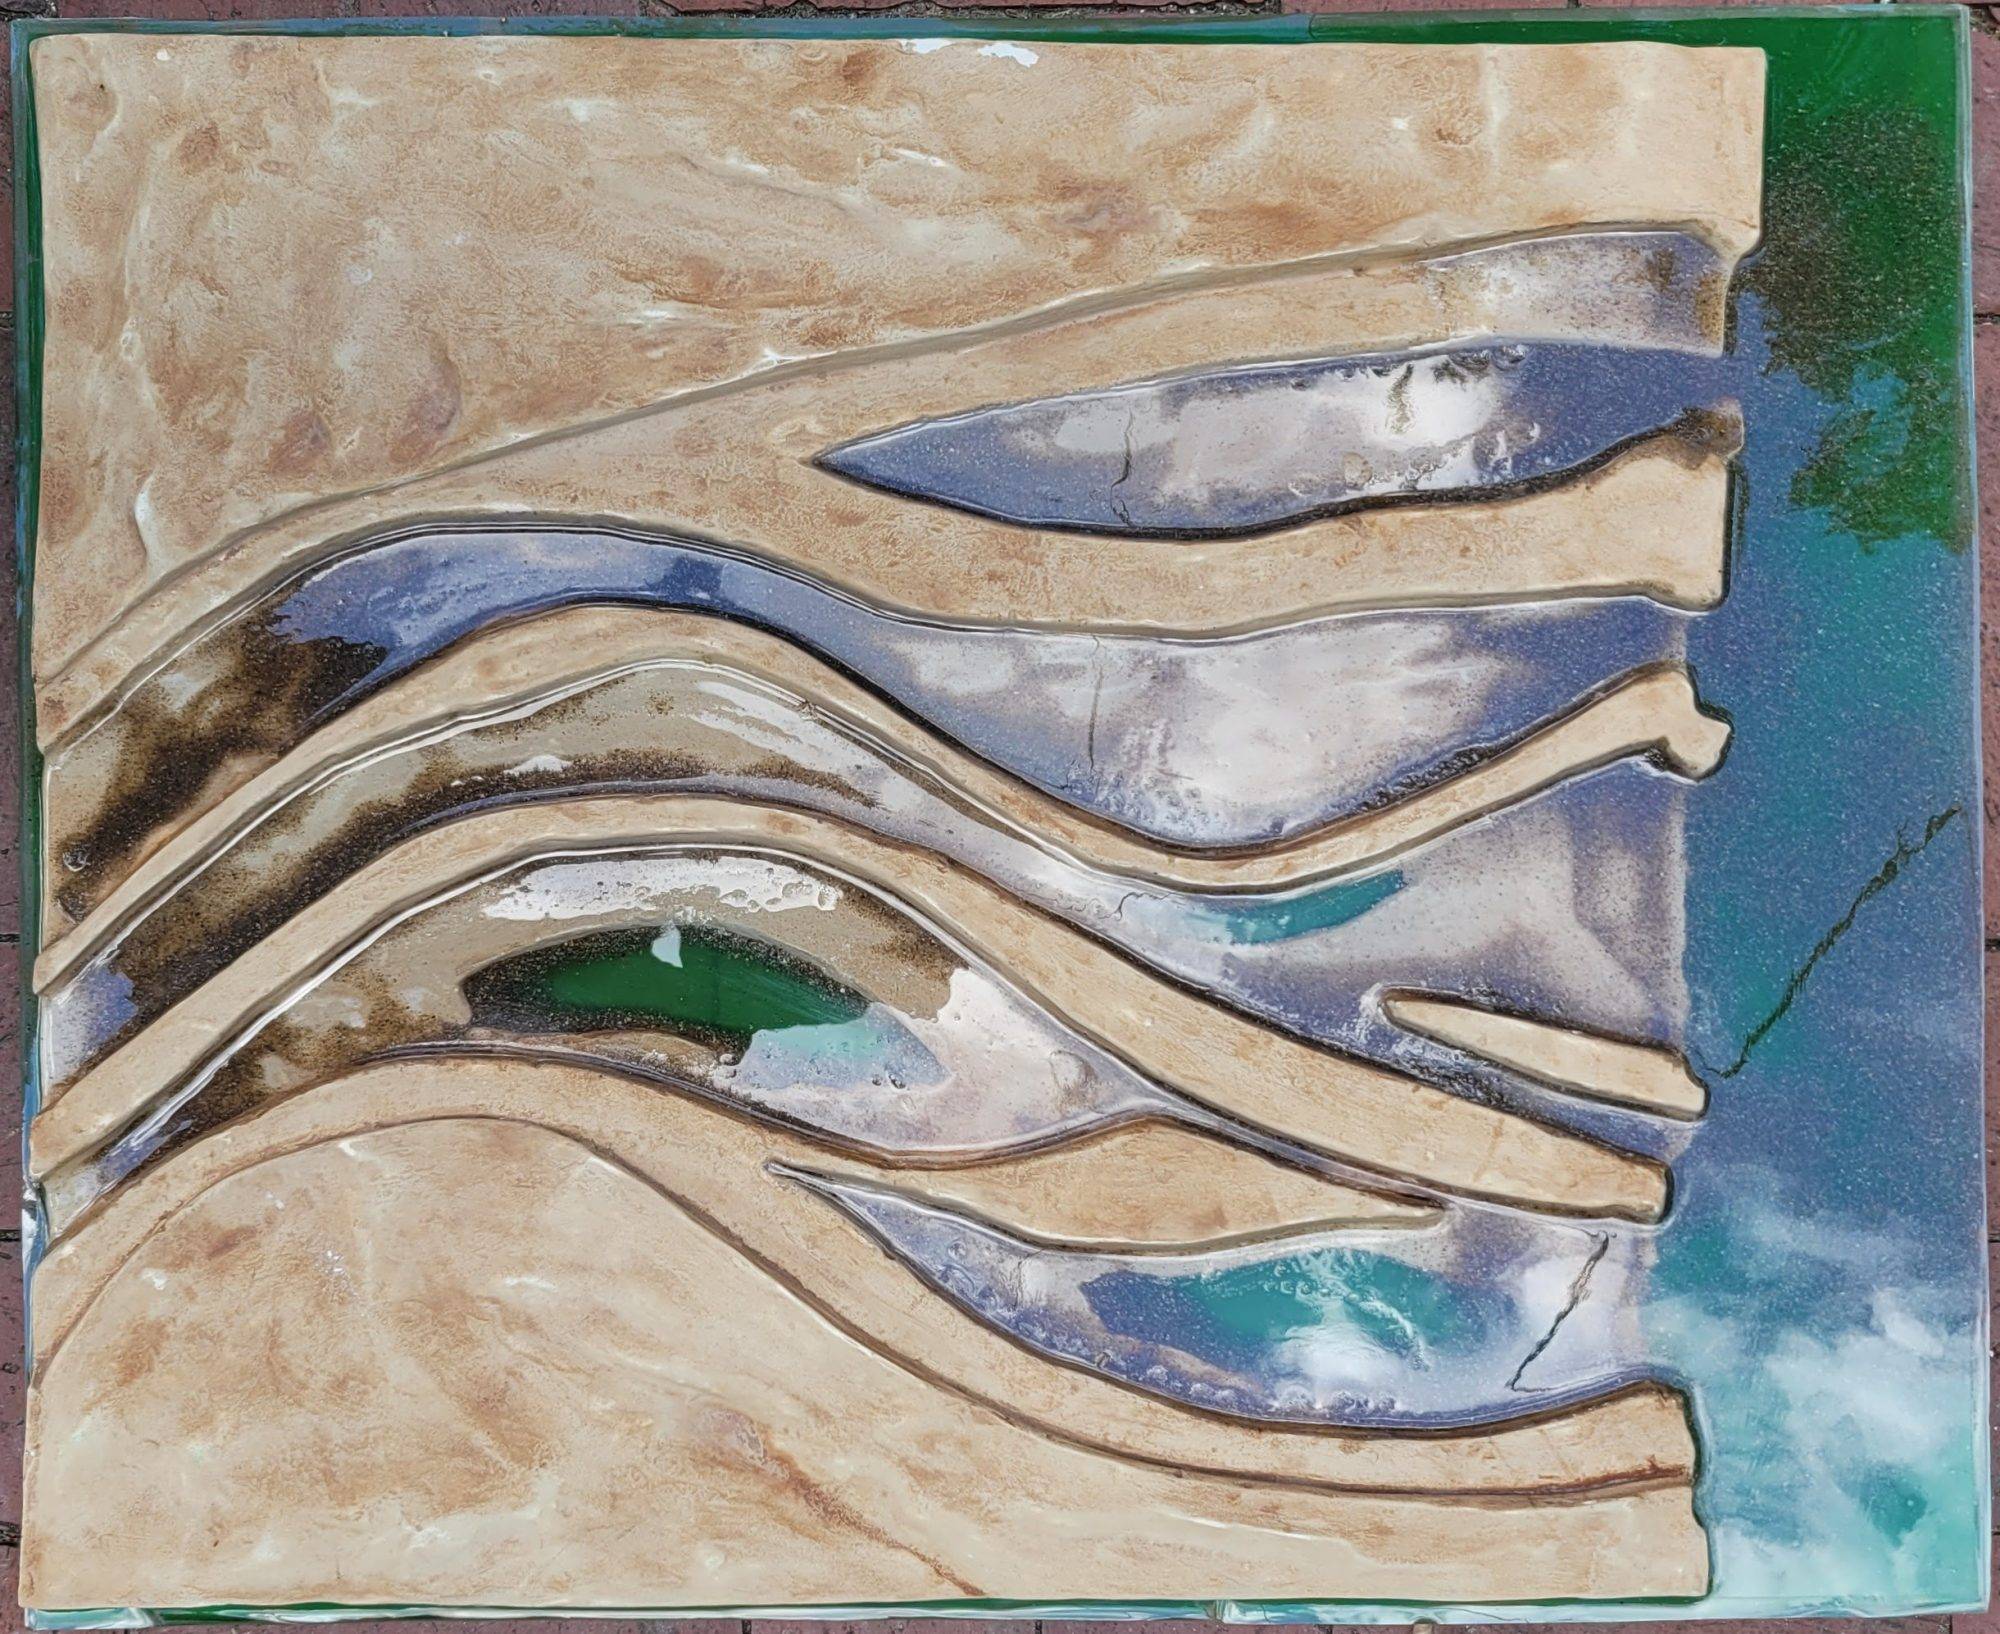 "Desert" topographic art showing desert soil eroding from floods, a sculpture made with plaster and resin. Watercolor was used to create shadows.